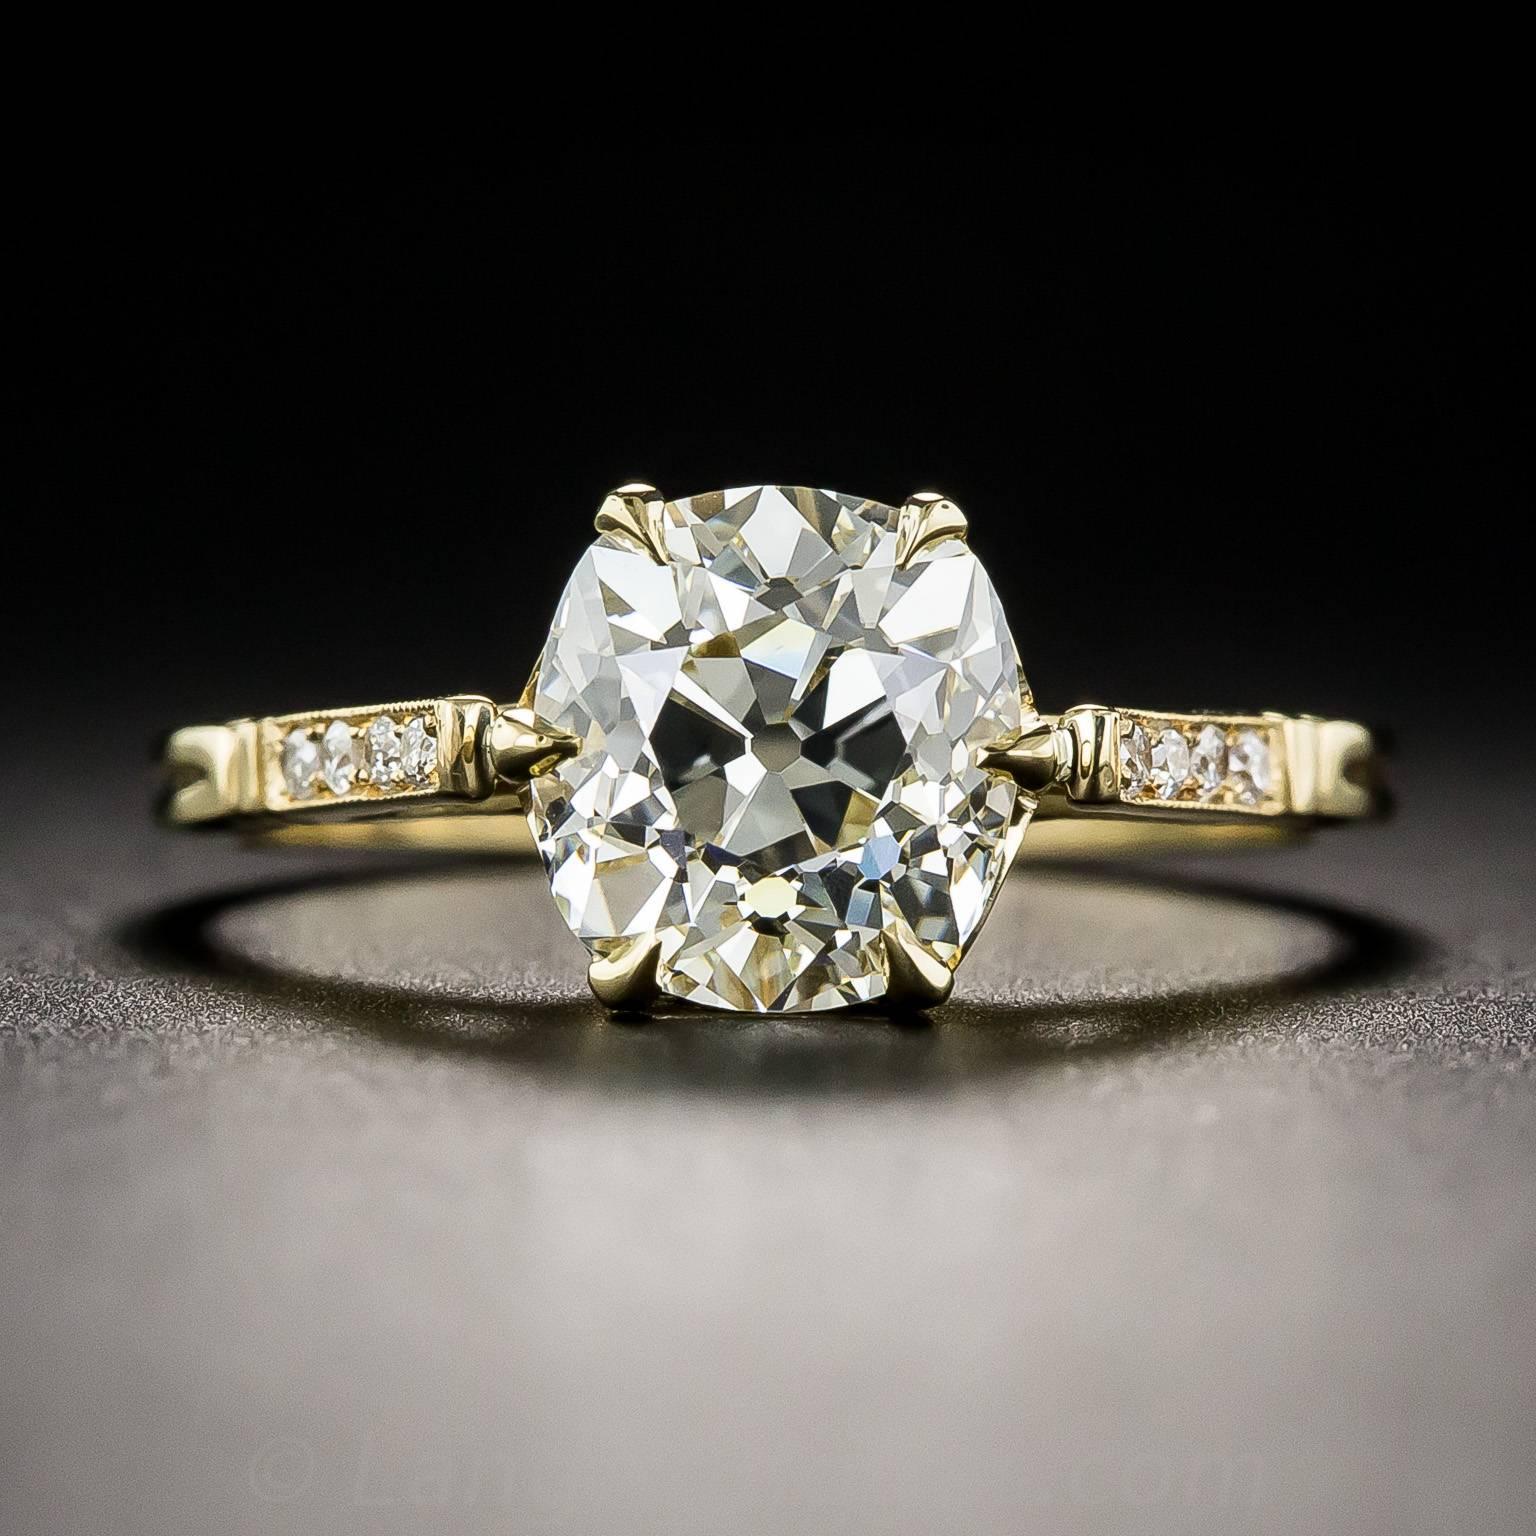 We commissioned our expert jeweler to fashion a new mounting for this gorgeous, radiant, 2.33 carat antique cushion-cut diamond to replace the worn out original. However, instead of platinum, we chose 18K gold to compliment the warm glow and sizzle